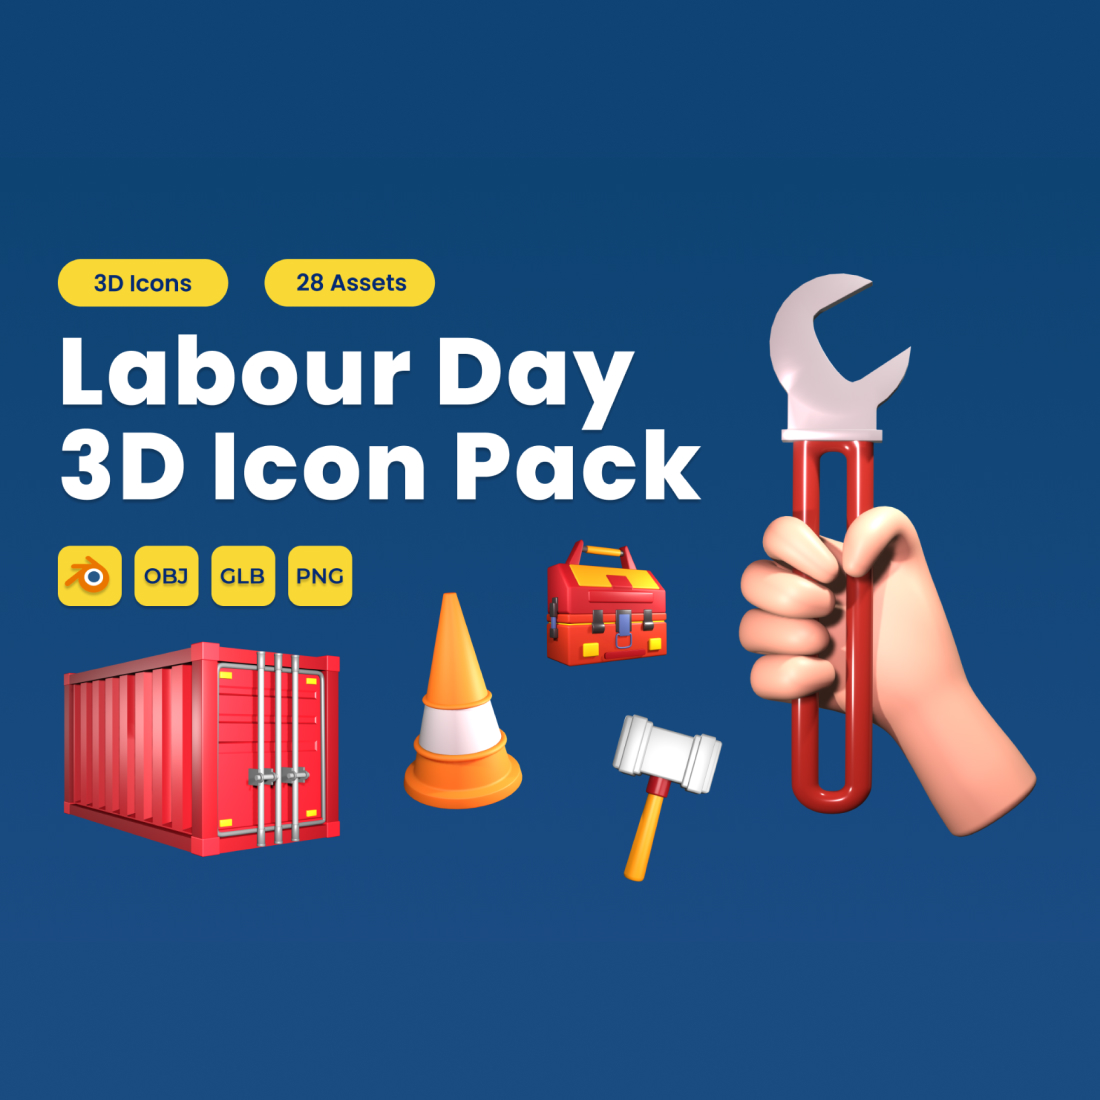 Labour Day 3D Icon Pack Vol 3 cover image.